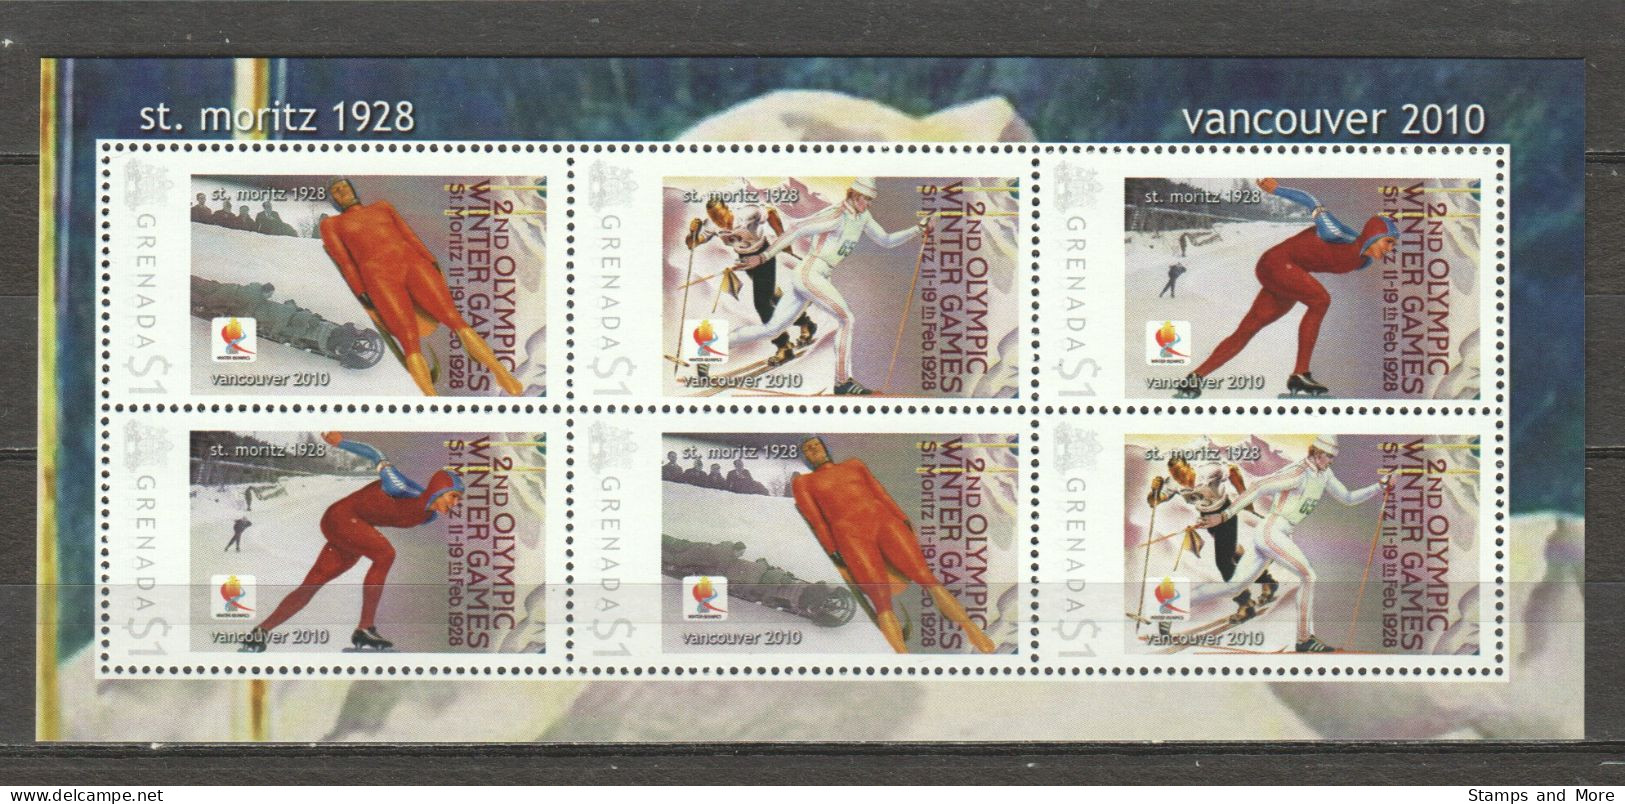 Grenada - Limited Edition Sheet 02 MNH - WINTER OLYMPICS VANCOUVER 2010 - St Moritz 1928 - Hiver 2010: Vancouver